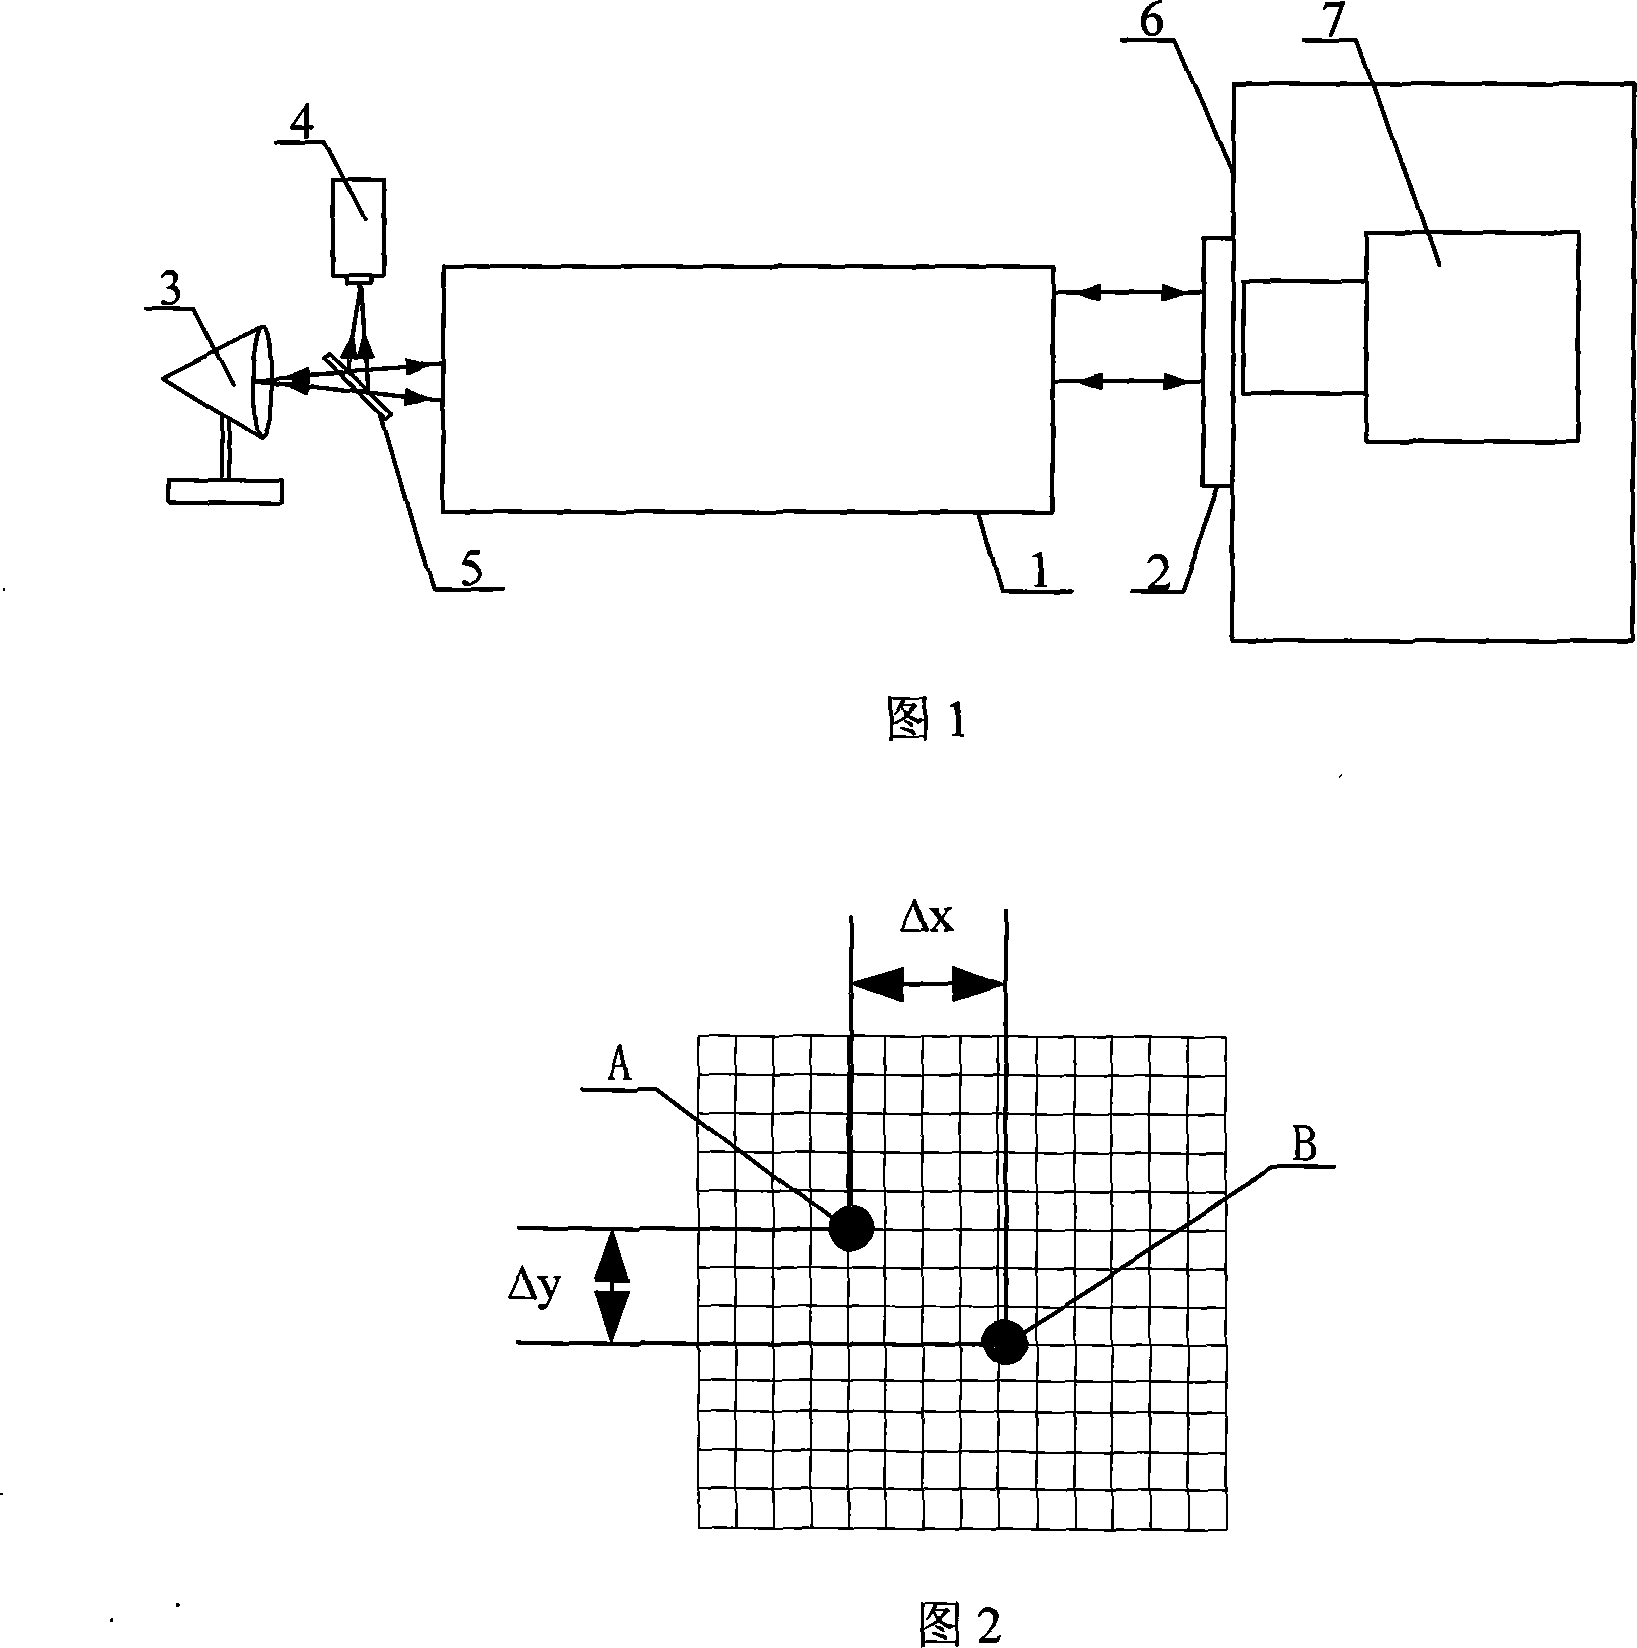 Laser emission axis and mechanical base level coaxiality measuring method based on angle prism